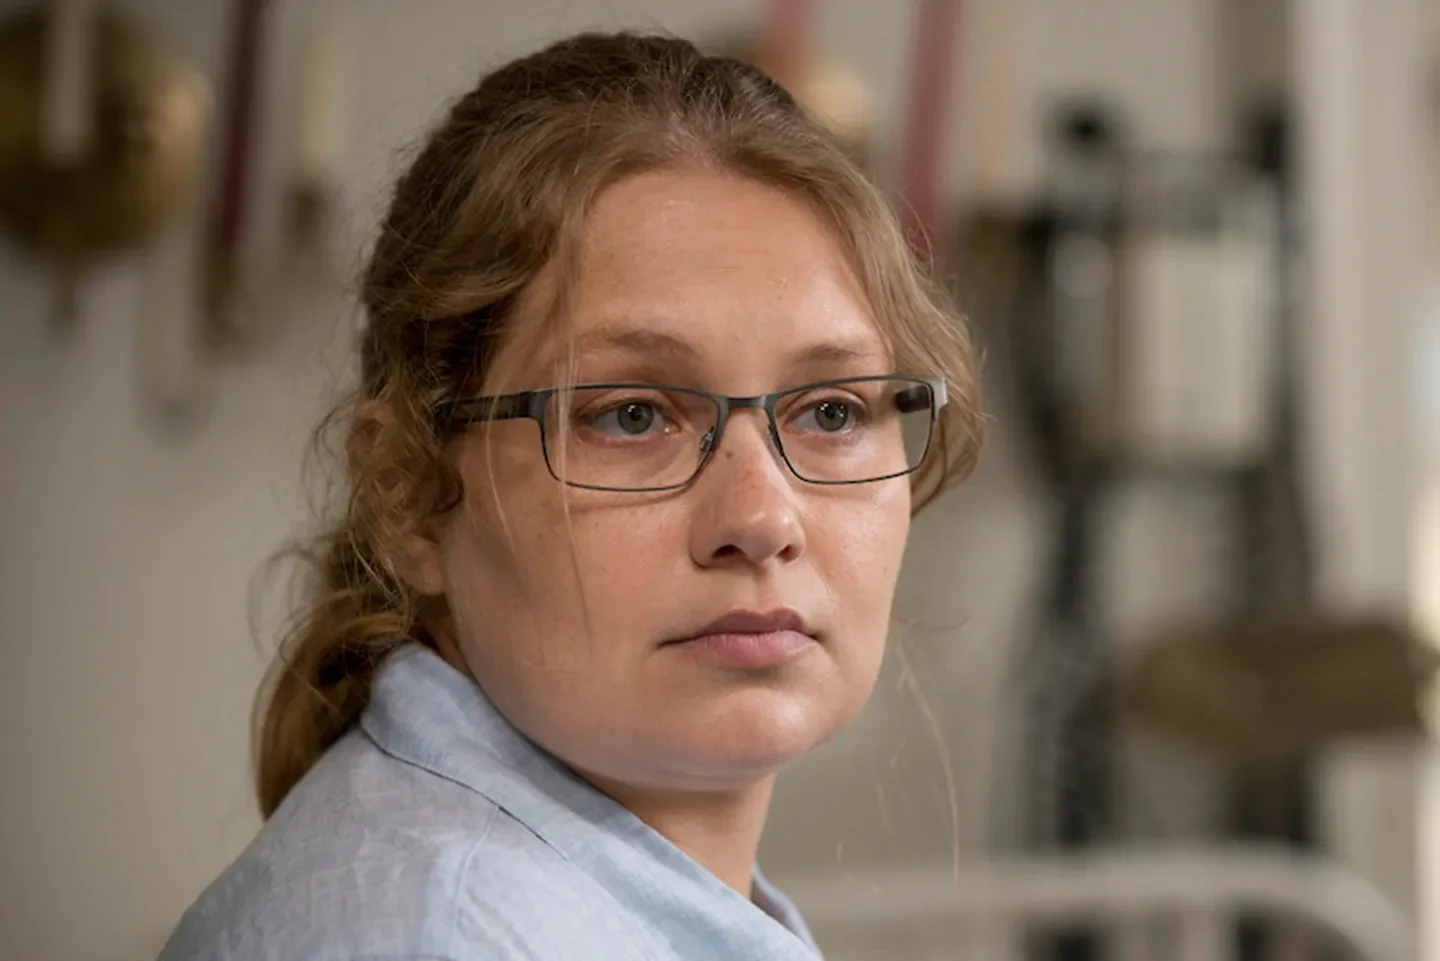 Merritt Wever portrayed the role of Denise Cloyd in the post apocalyptic series 